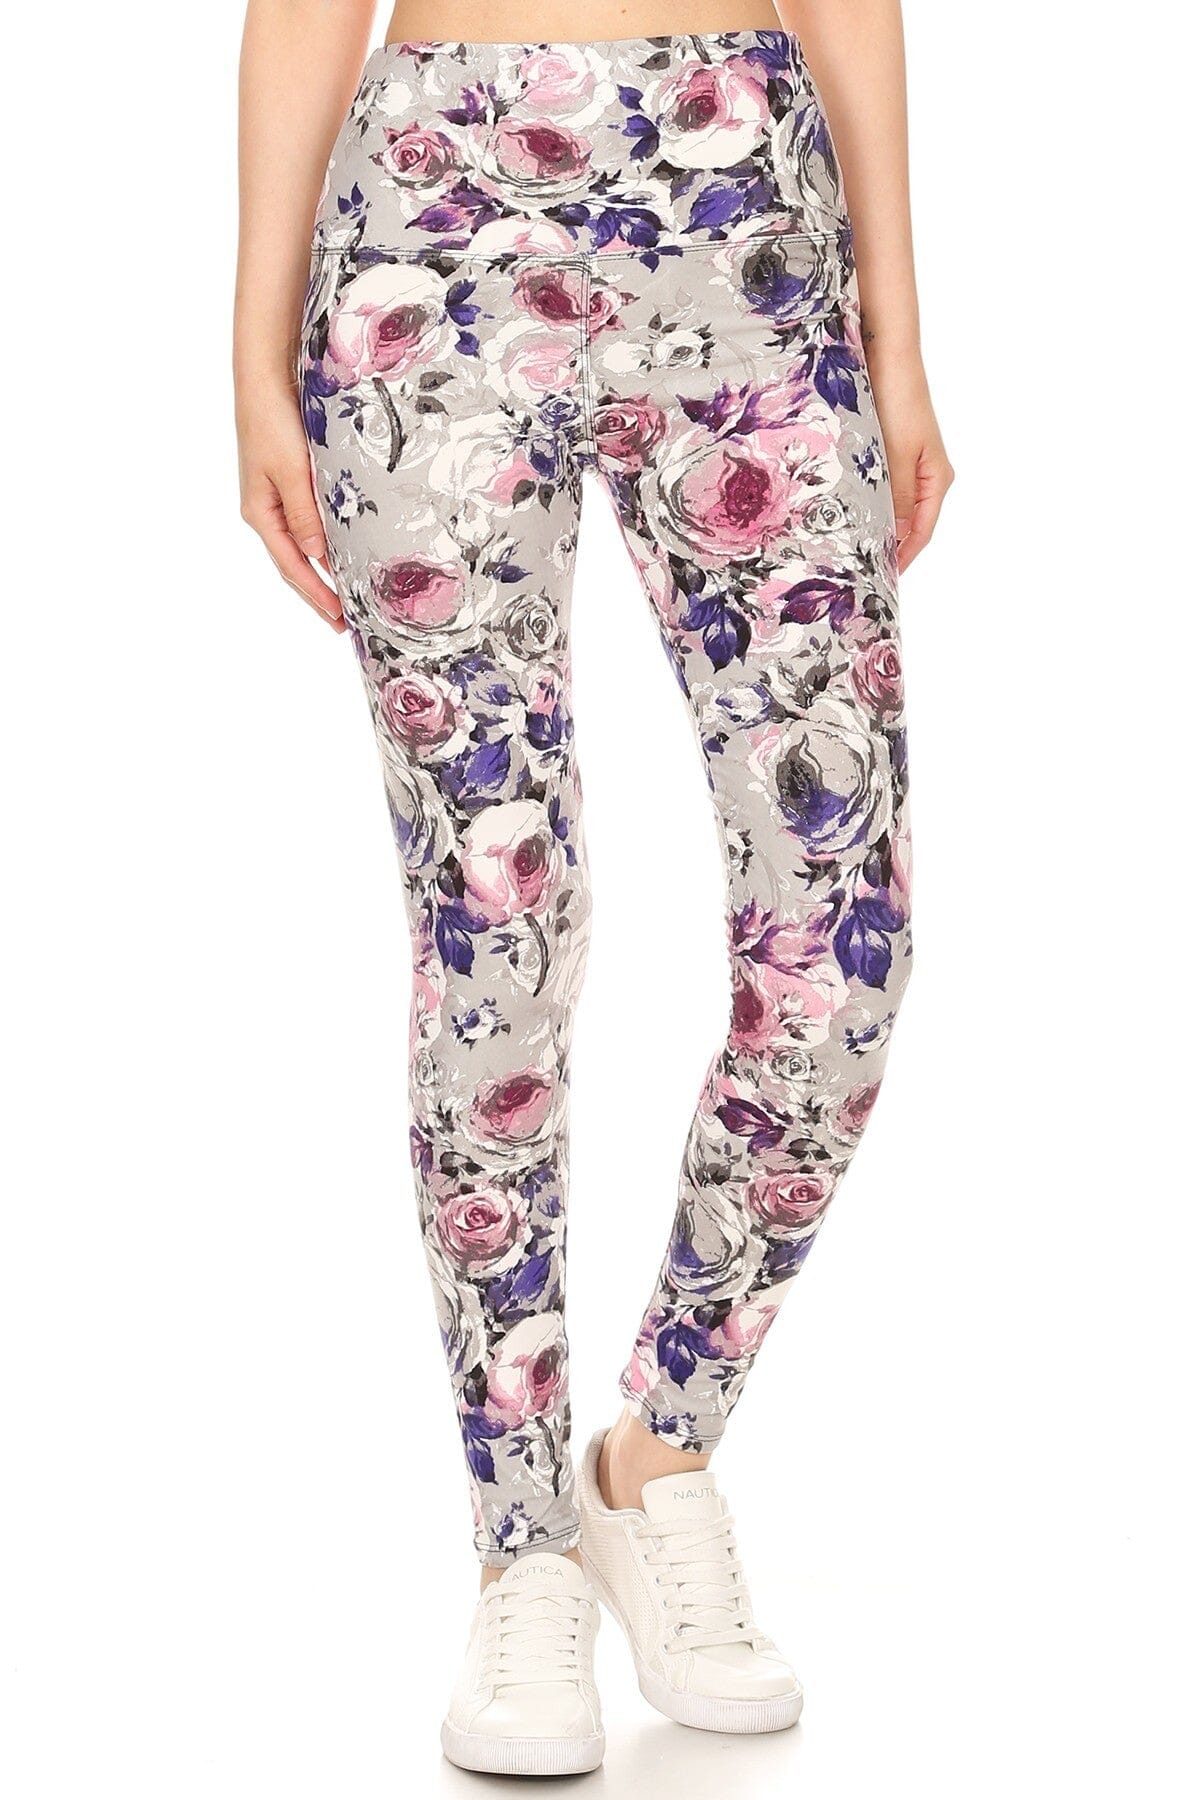 5-inch Long Yoga Style Banded Lined Floral Printed Knit Legging With High Waist_ Bottoms jehouze 